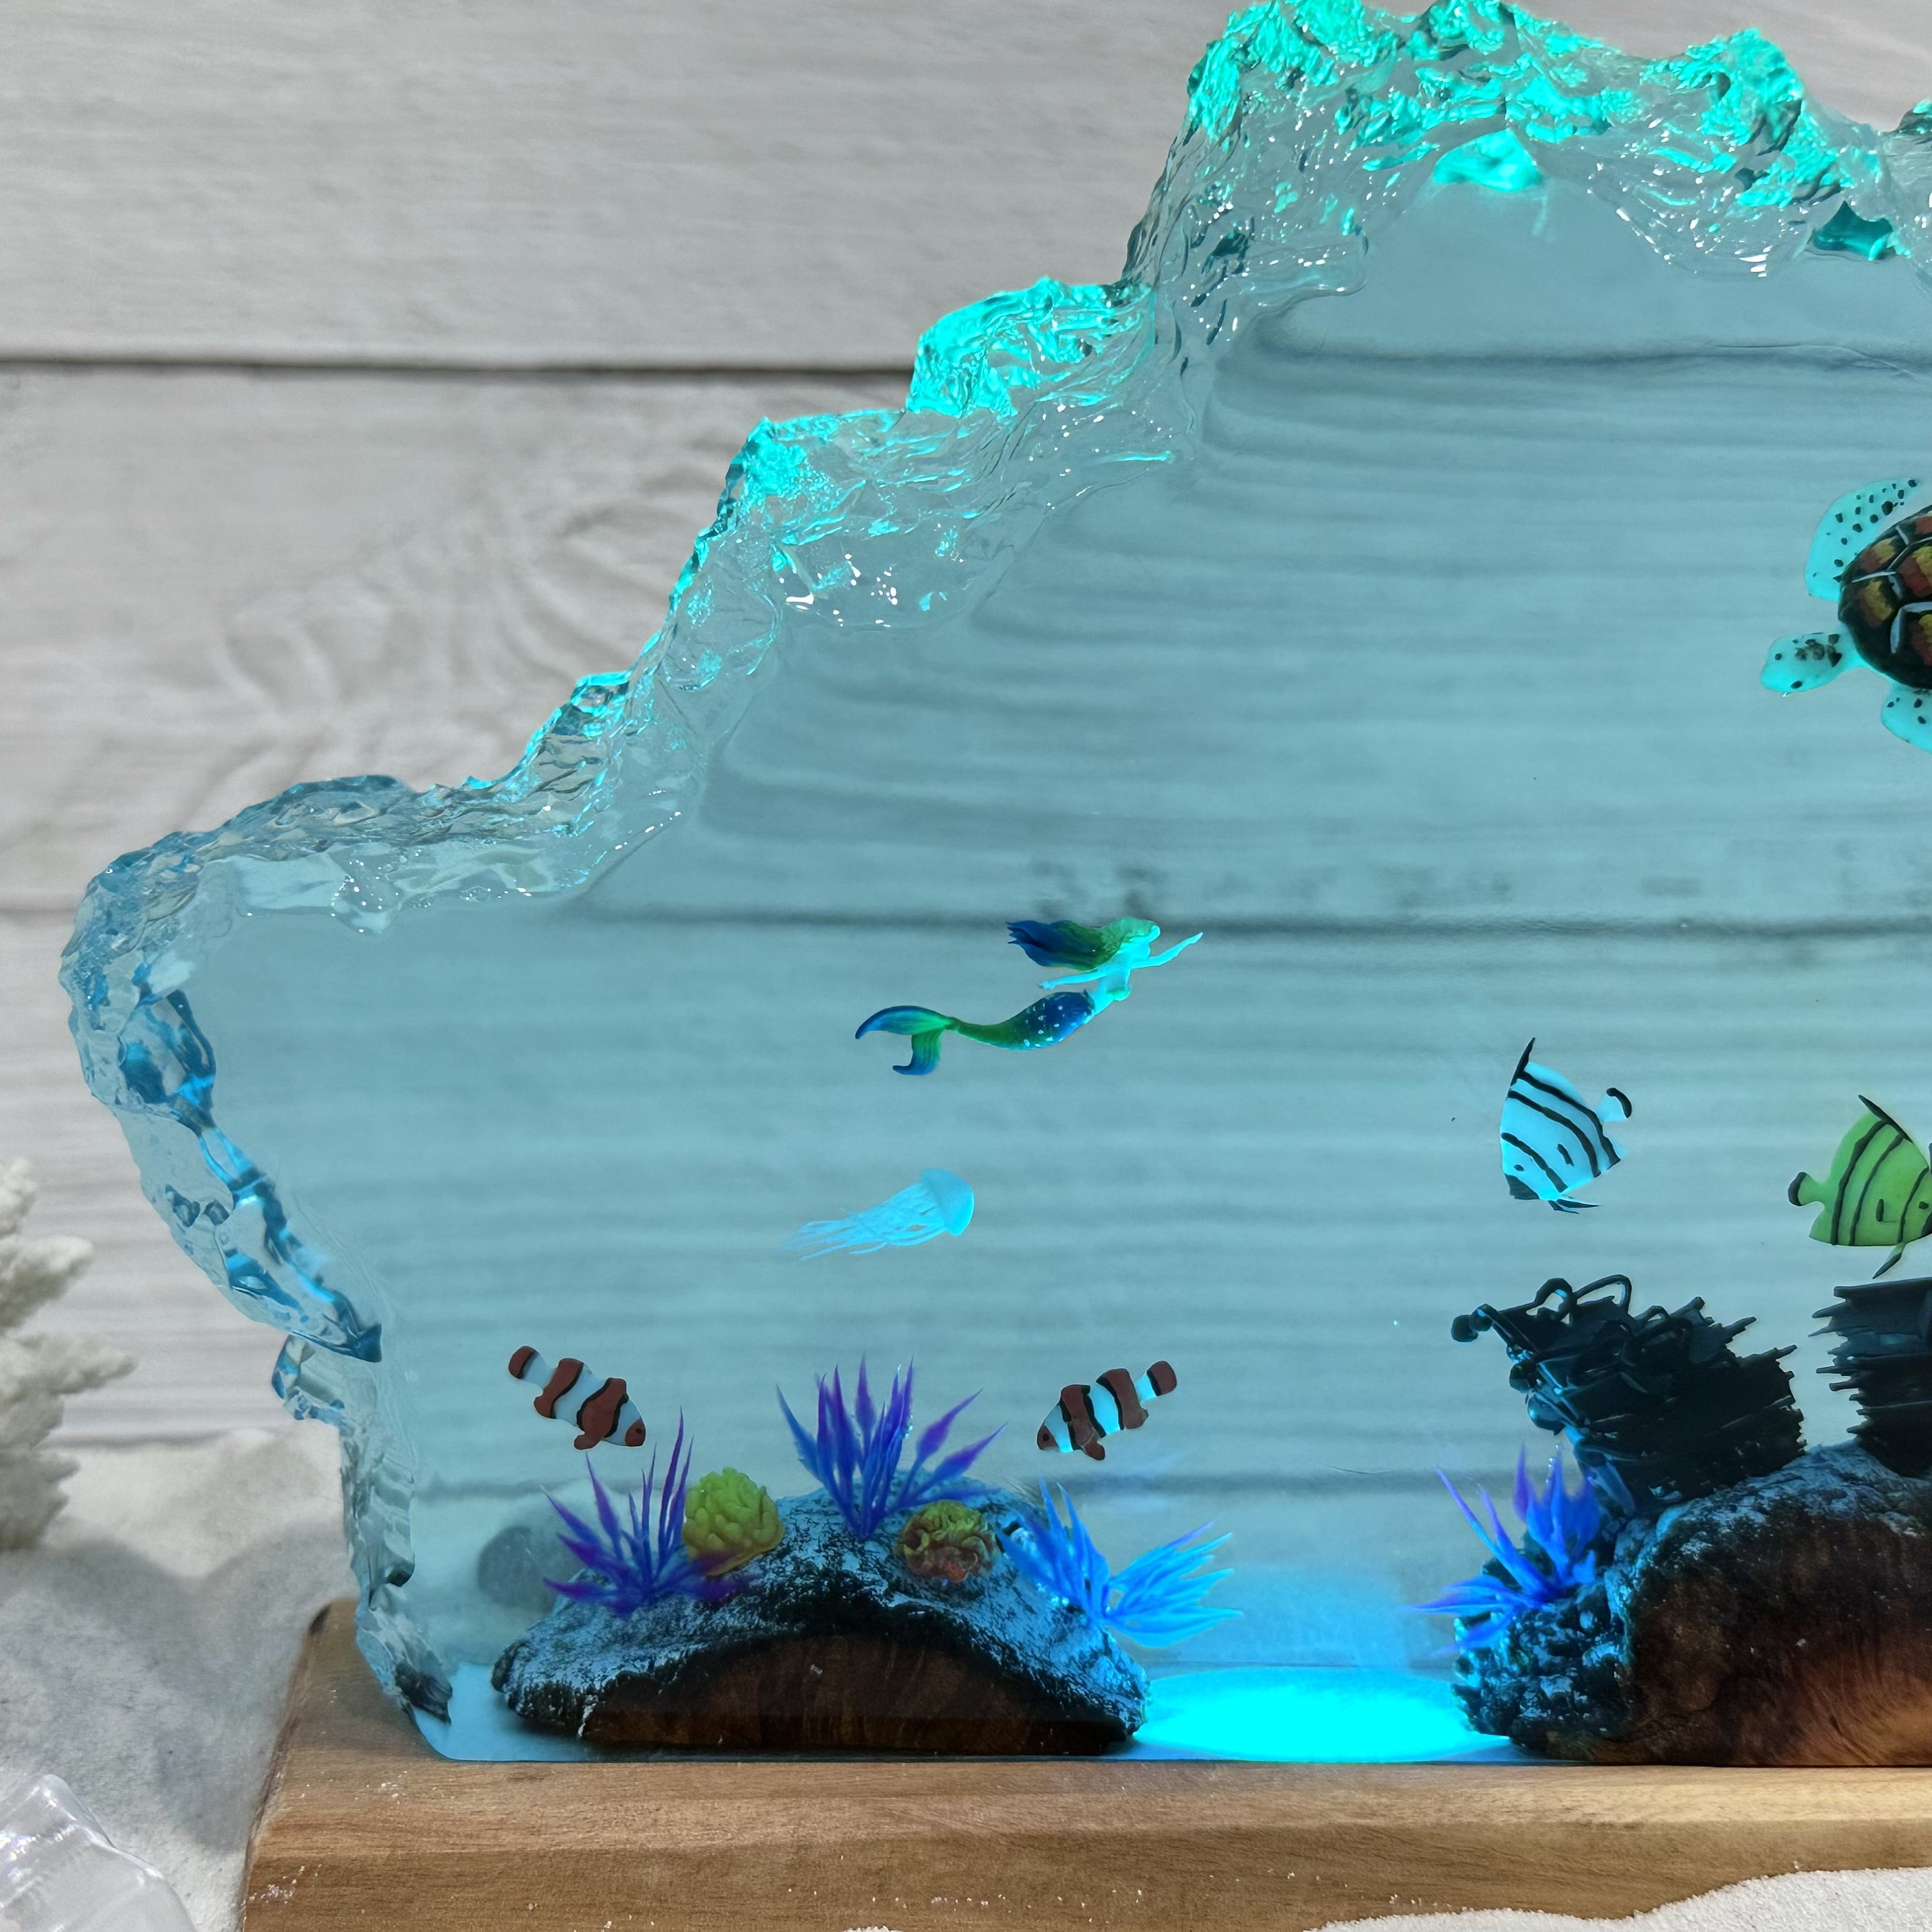 Handmade Resin Lamp Personalized,epoxy Resin,lighting Lamp,decoration for  Room,bedroom Decoration,table Lamp,resin,gift Idea,birthday Gift 